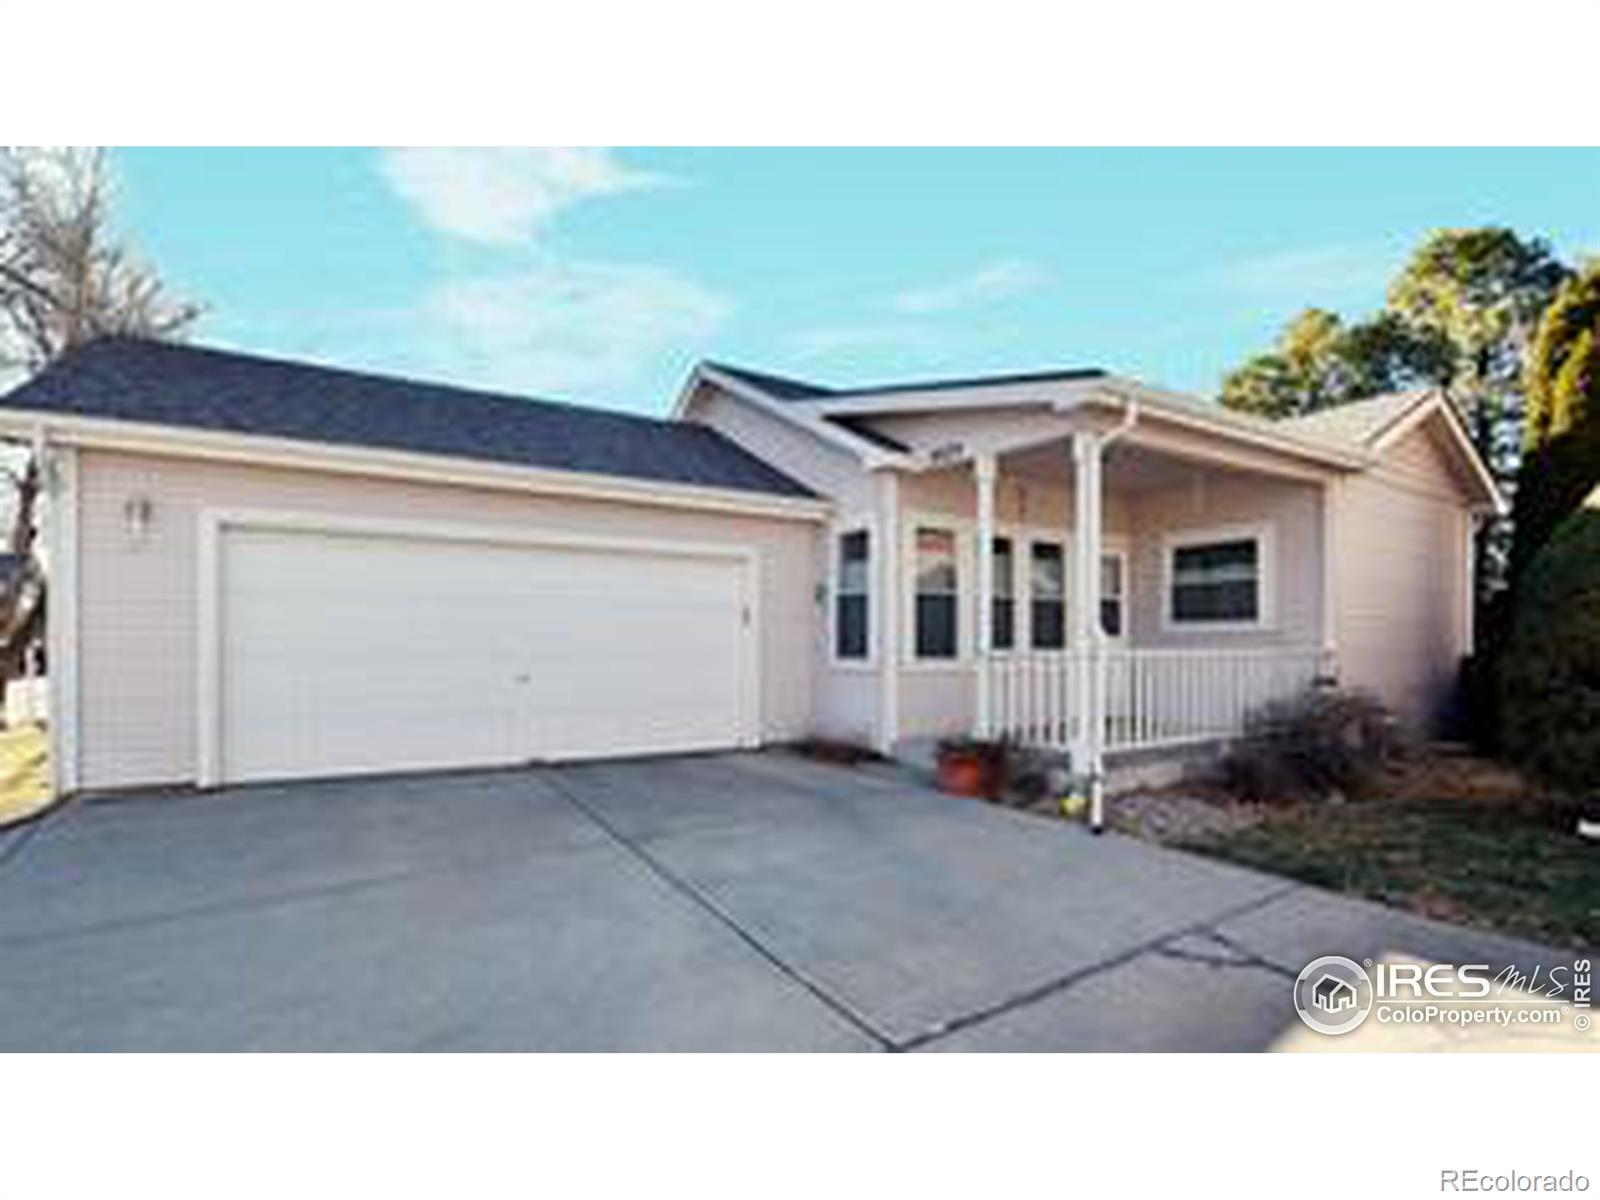 3575  Pike Circle, fort collins MLS: 4567891003878 Beds: 2 Baths: 2 Price: $469,000